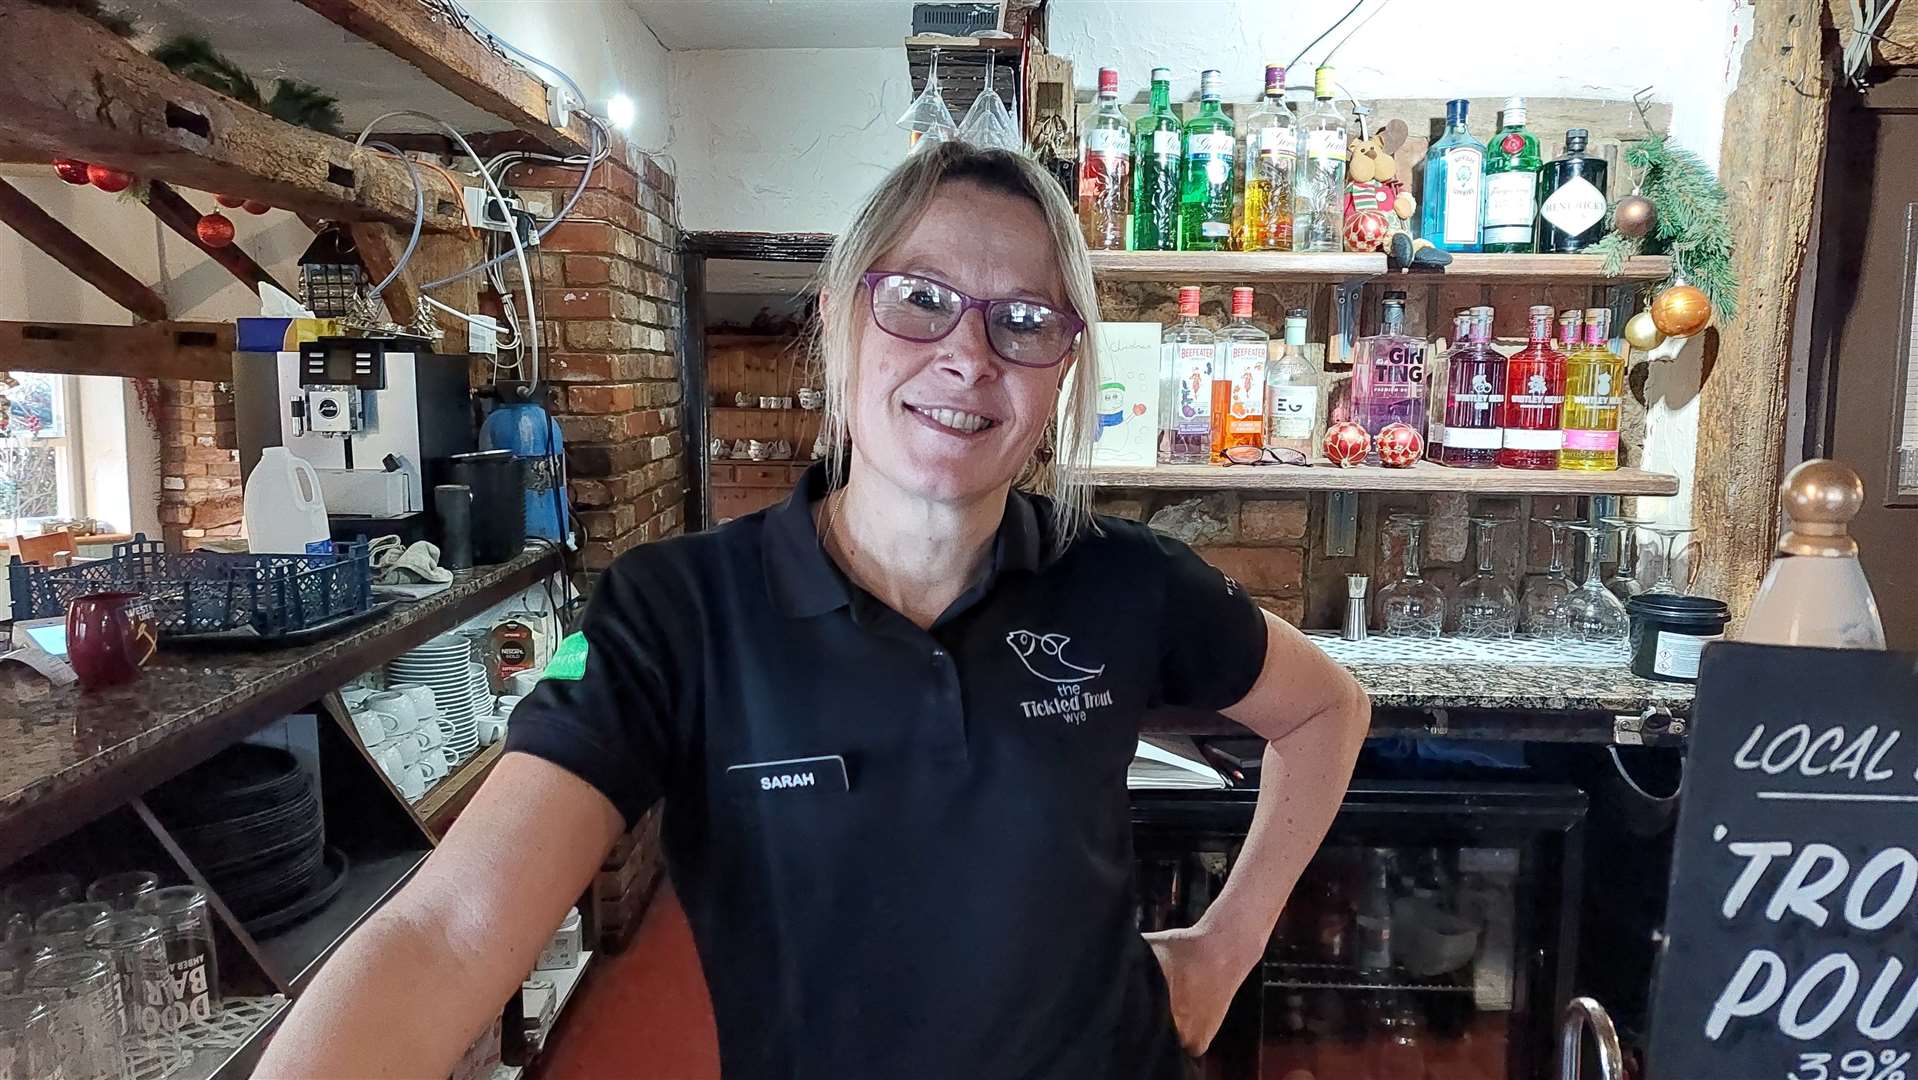 Sarah Borny, front of house at the Tickled Trout in Wye